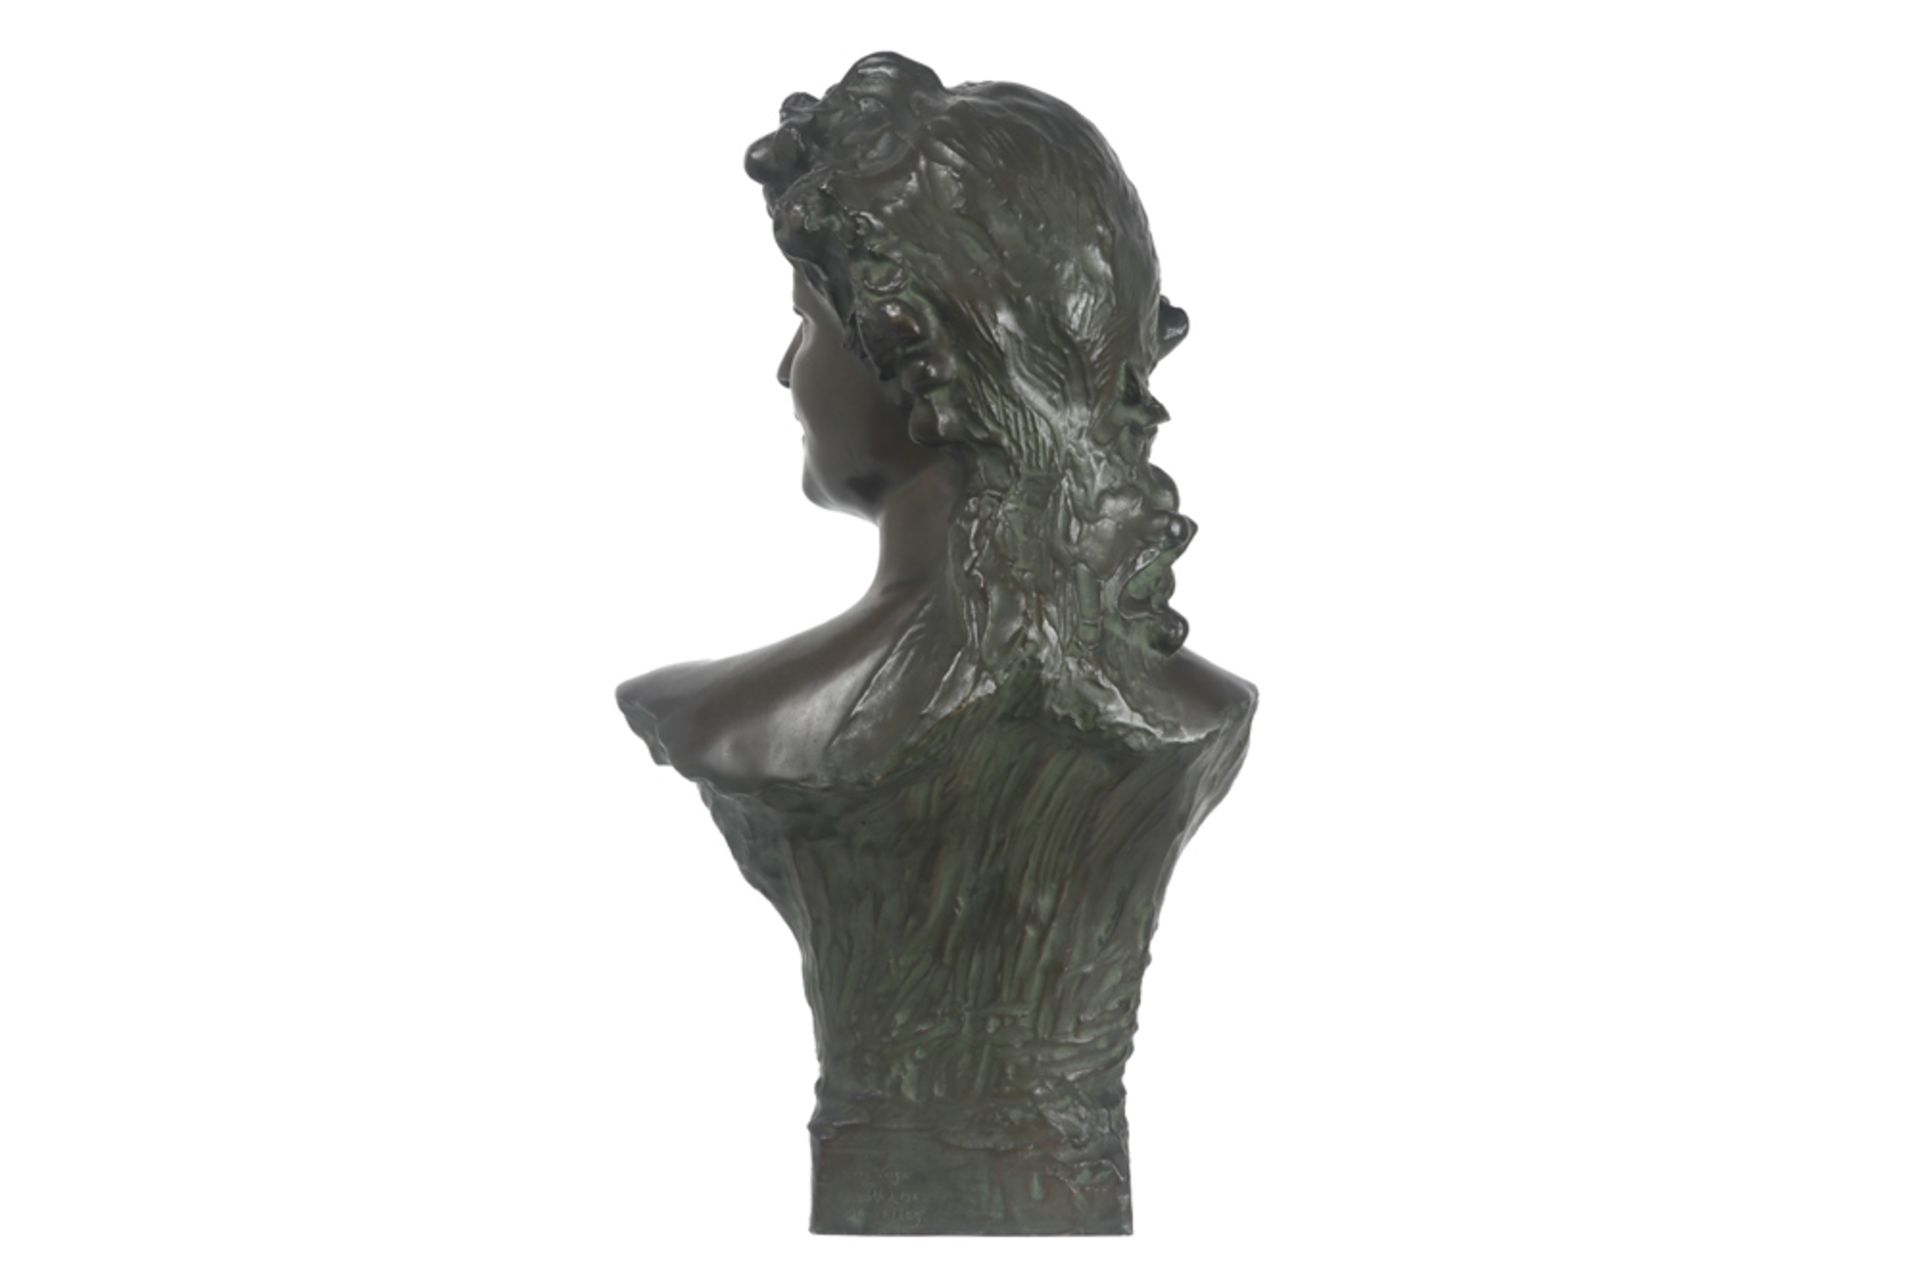 antique Belgian sculpture in bronze - signed Jef Lambeaux and with its foundry mark || LAMBEAUX - Image 4 of 7